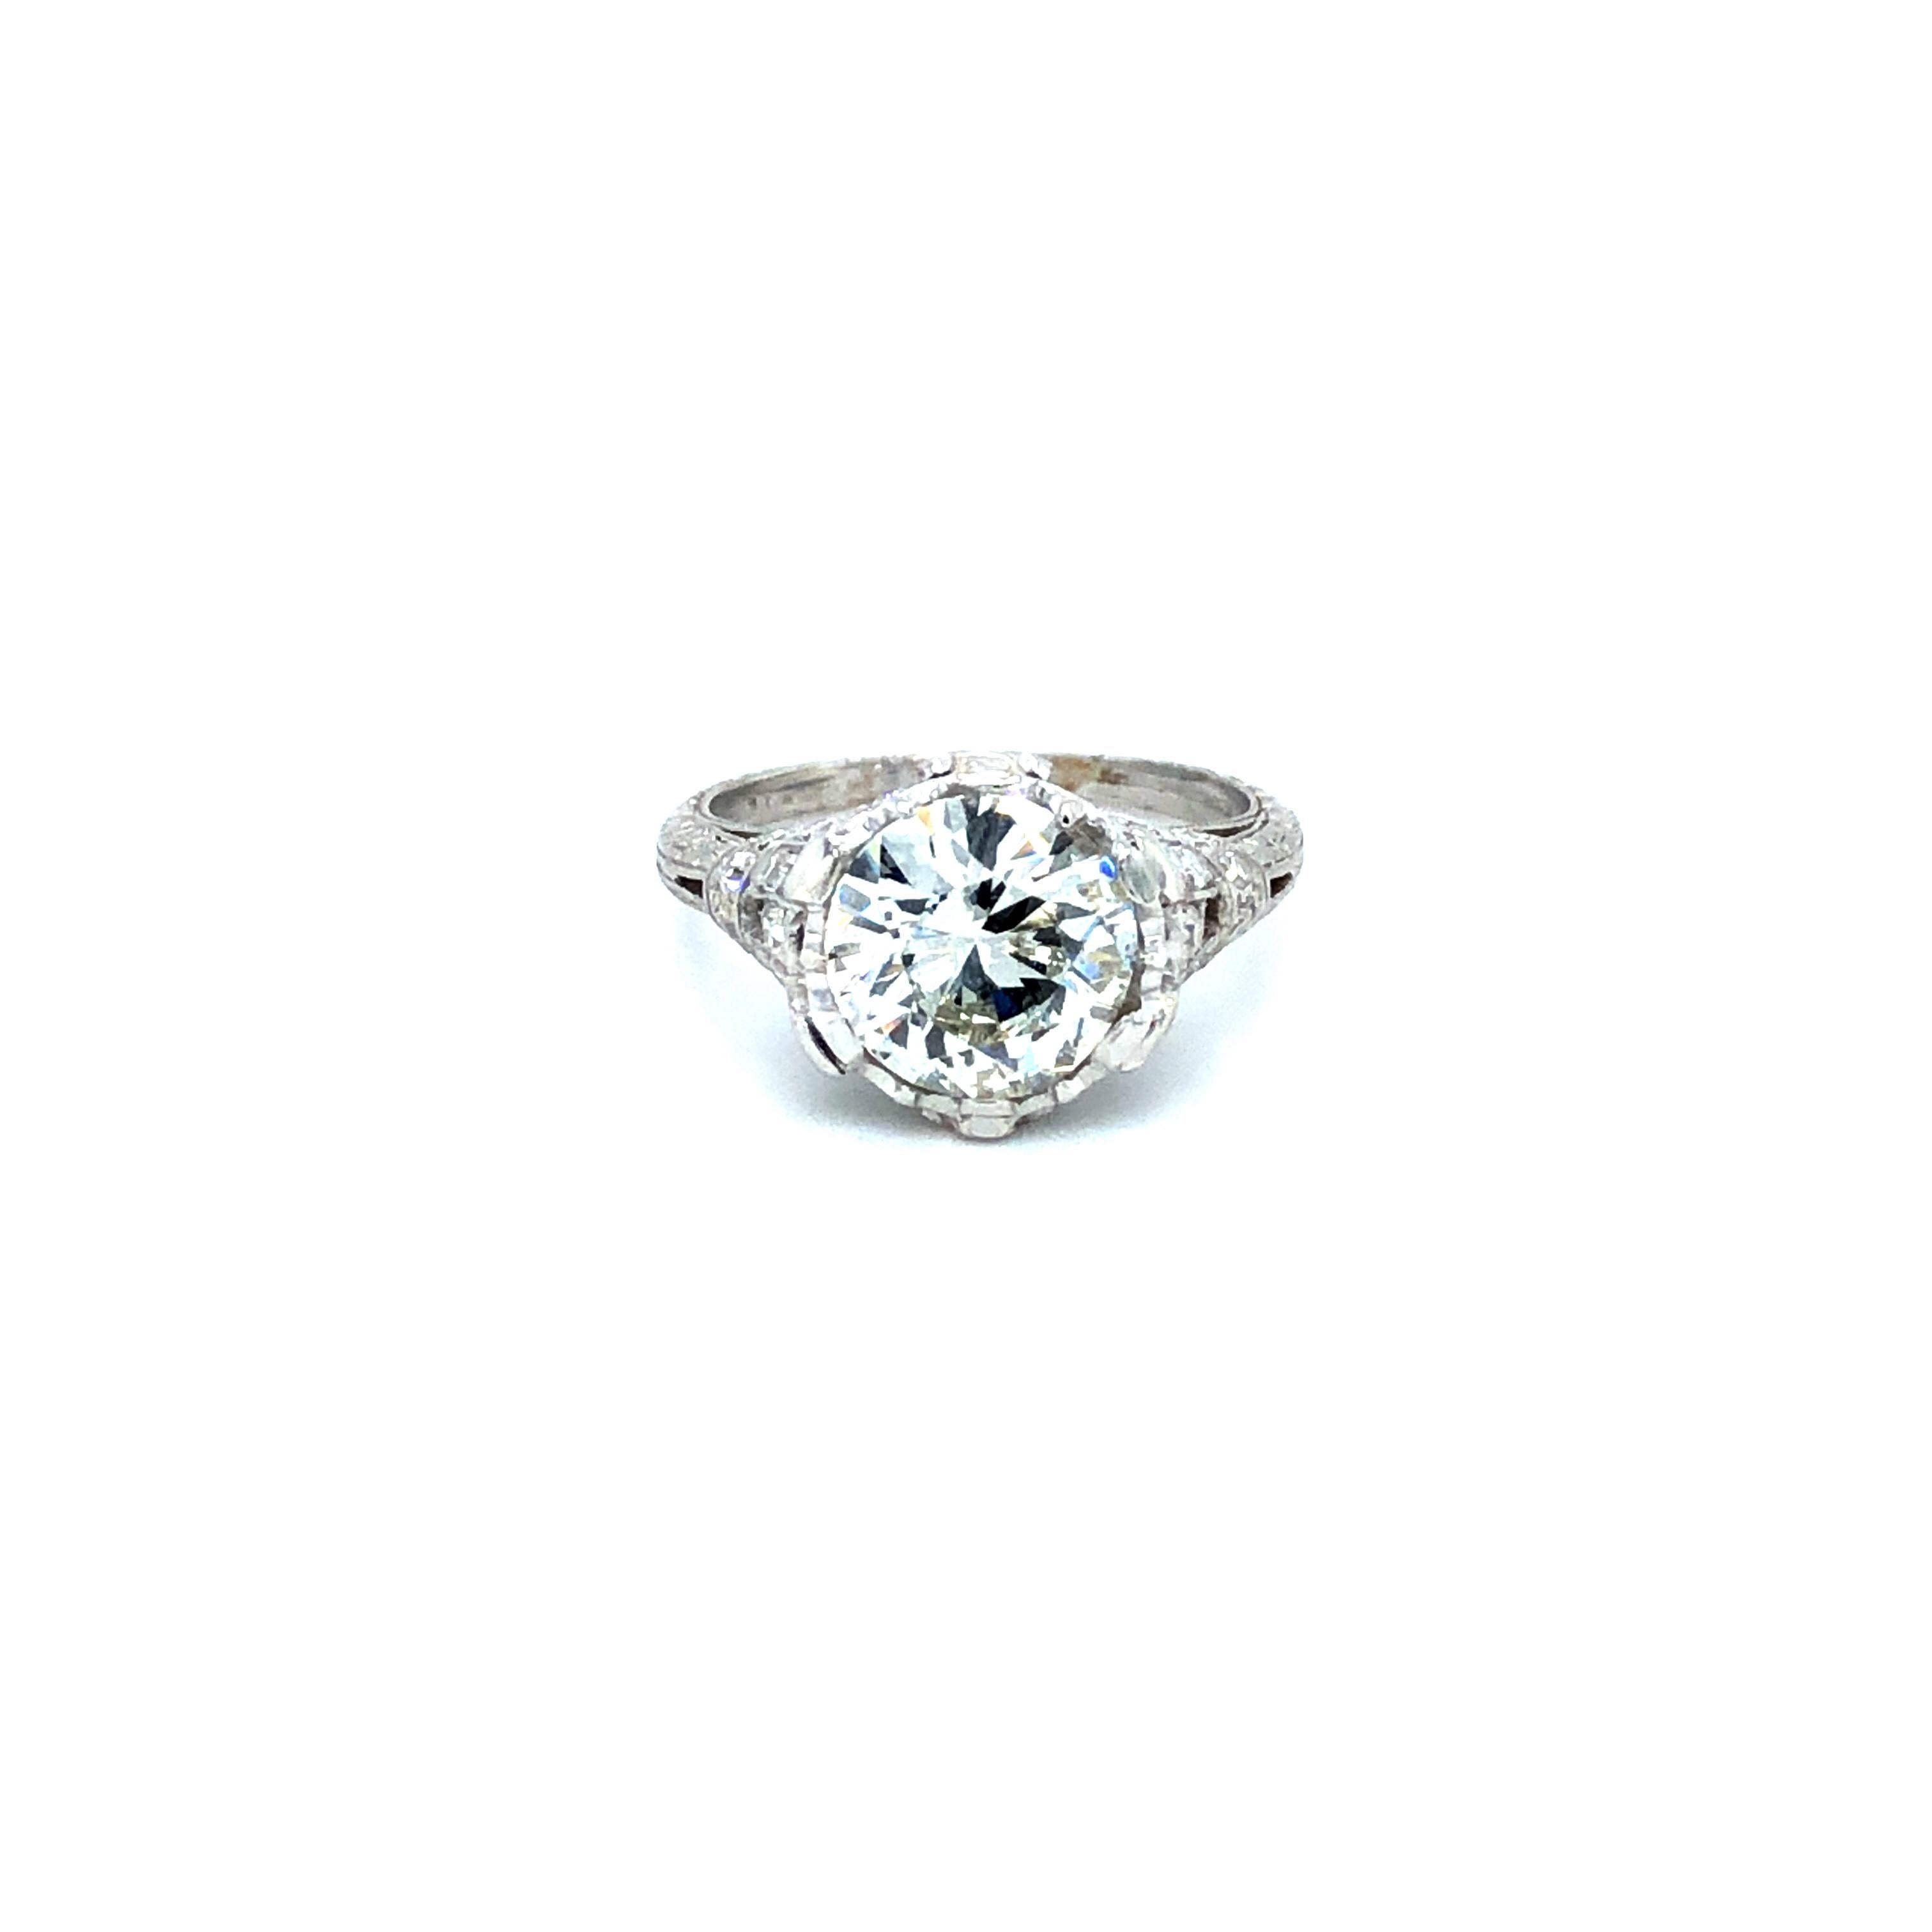 Offered here is a vintage large diamond platinum engagement ring, circa mid last century ( 1950-60 ).
Featuring one natural earth mined diamond with a transitional cut, weighing 2.30 carats, sparkly bright white and fine quality. I-J in color and